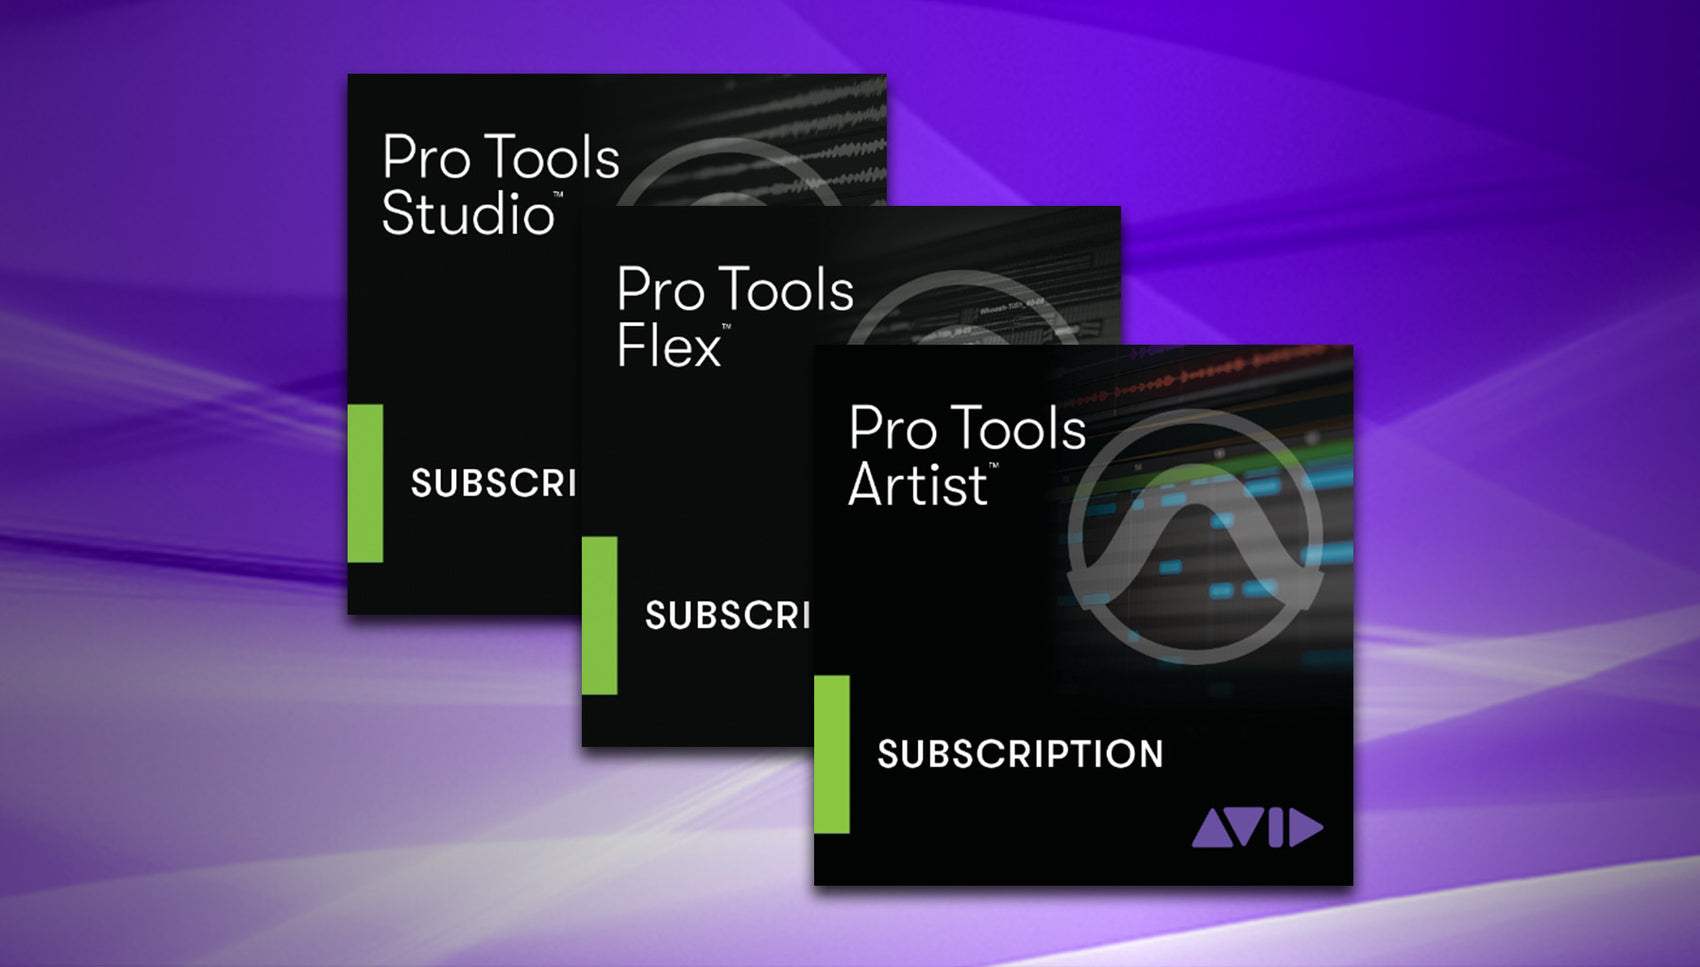 Avid introduces new versions of Pro Tools!